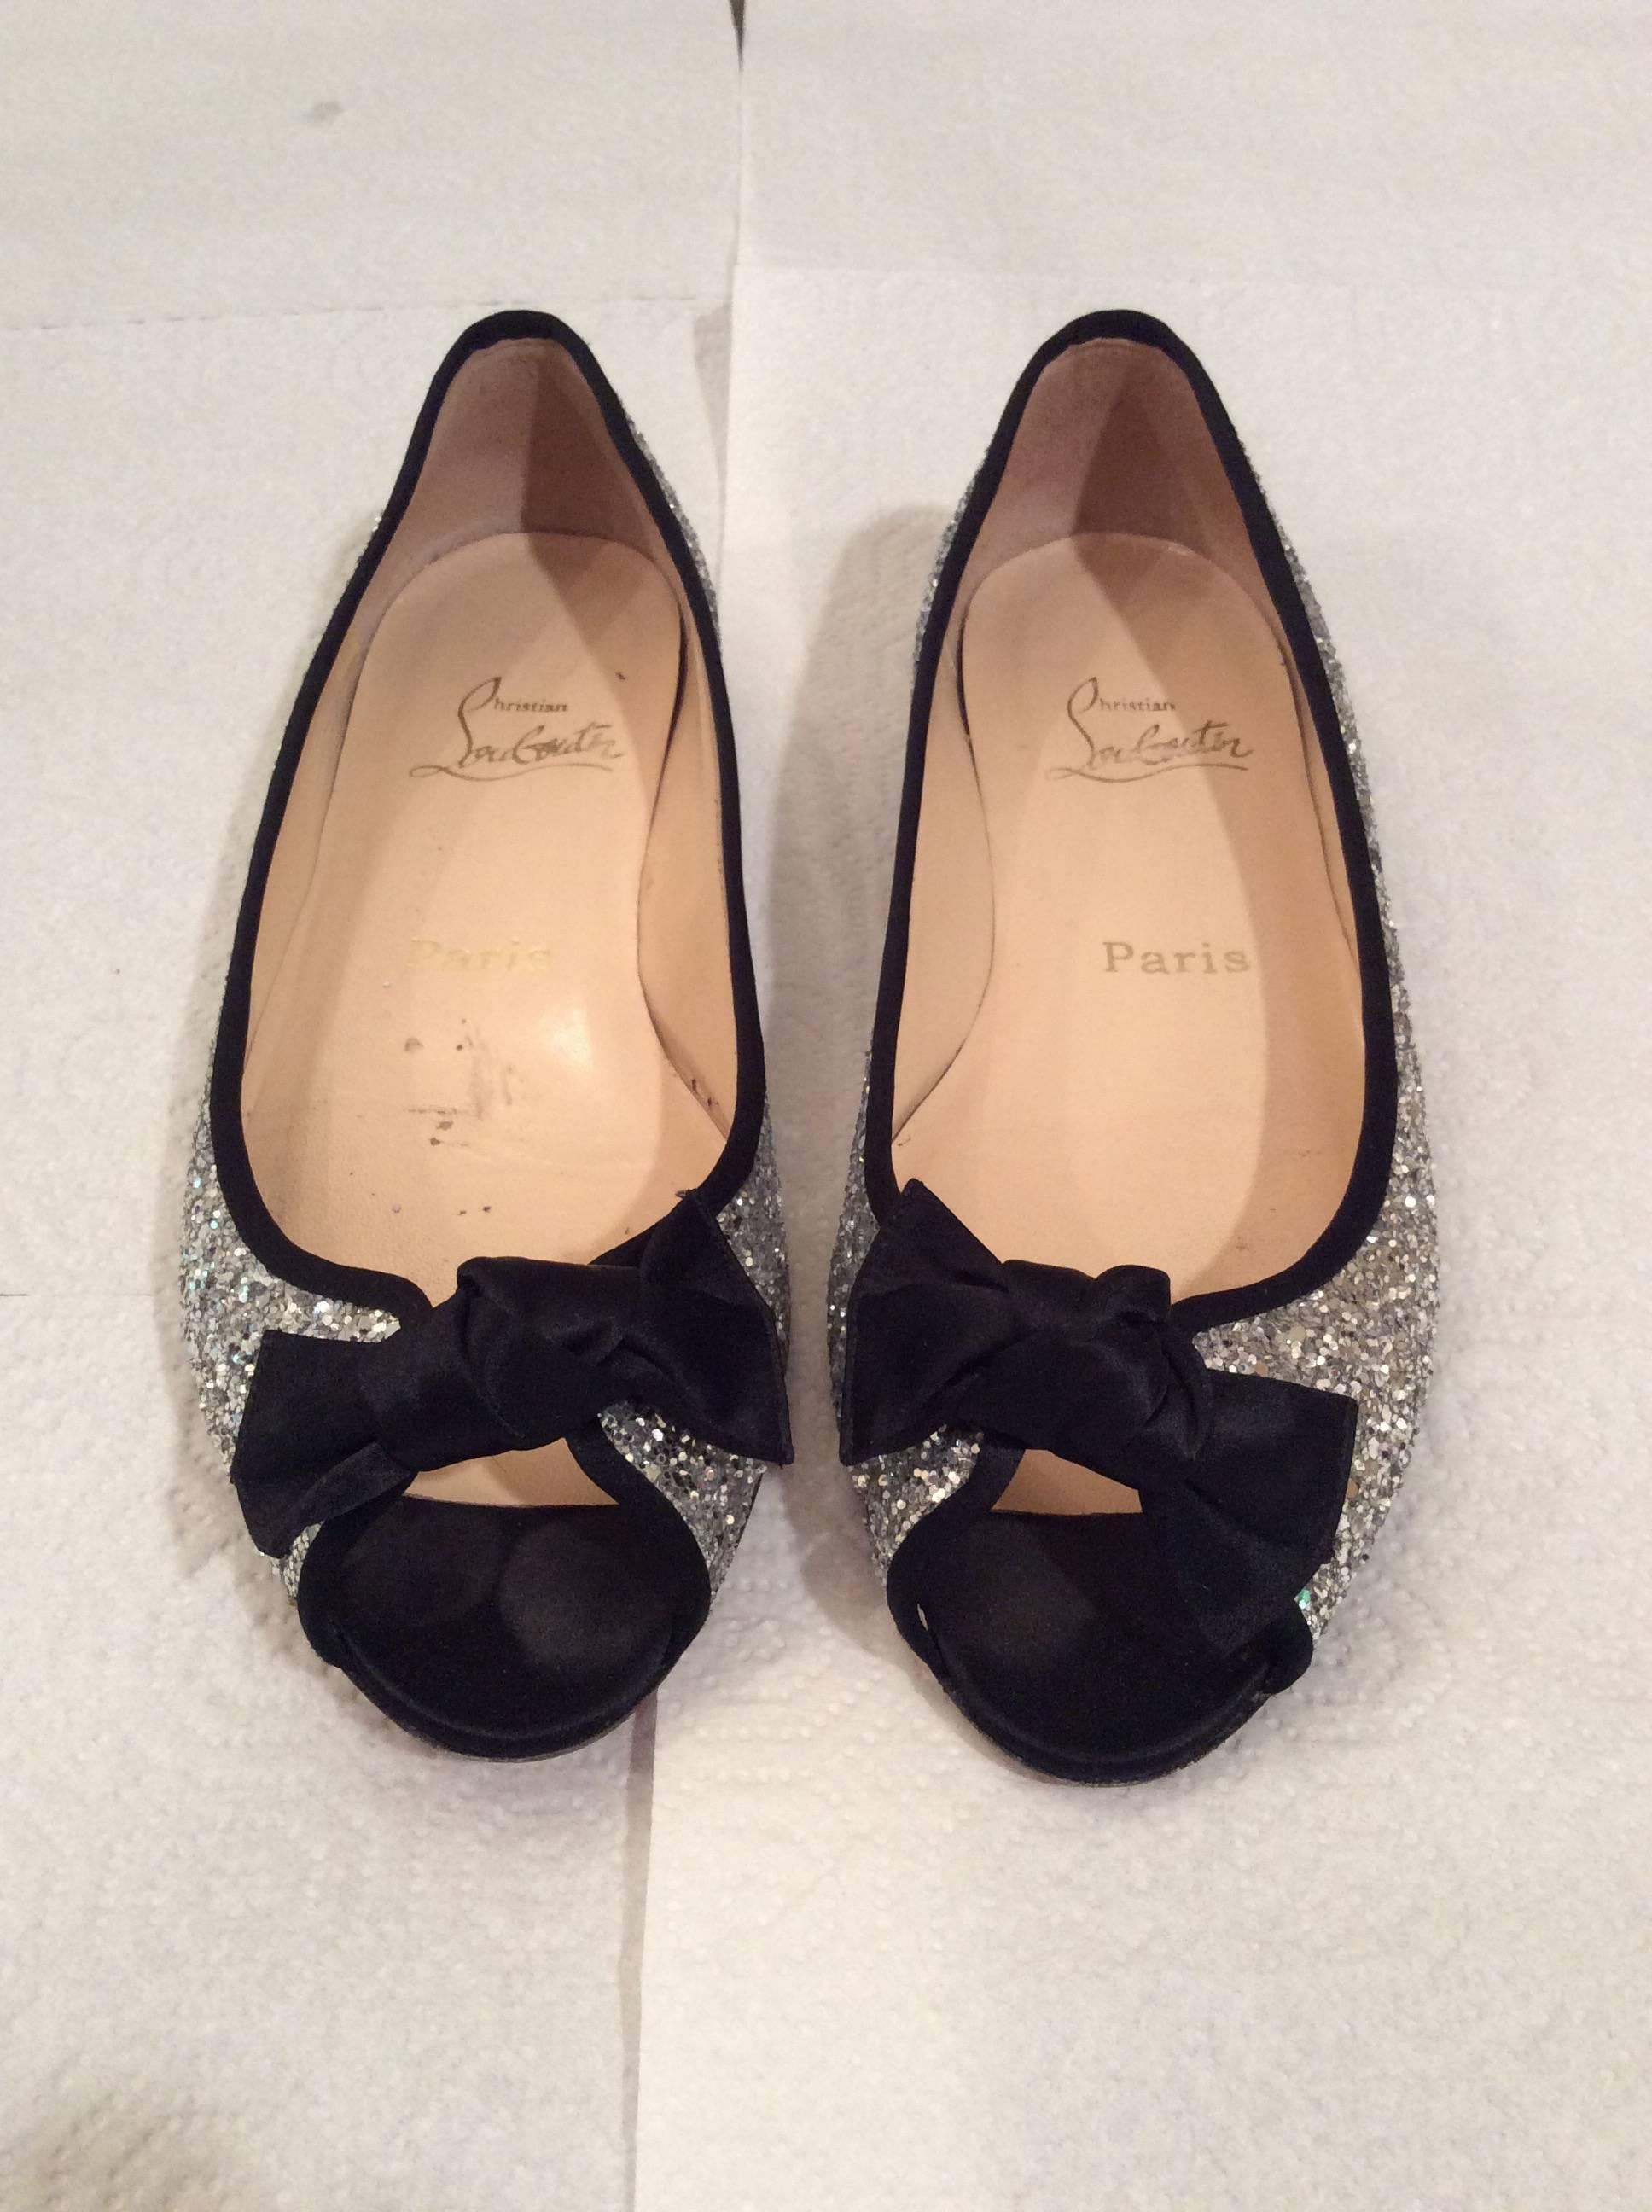 You are looking at a beautiful pair of gently worn Christian Louboutin size 37.5 open toed with silver sparkles trimmed in black silk bow in the front. Bottom of shoe has been replaced with a red anti-slip vibram sole. 

Length of shoe - 9.5